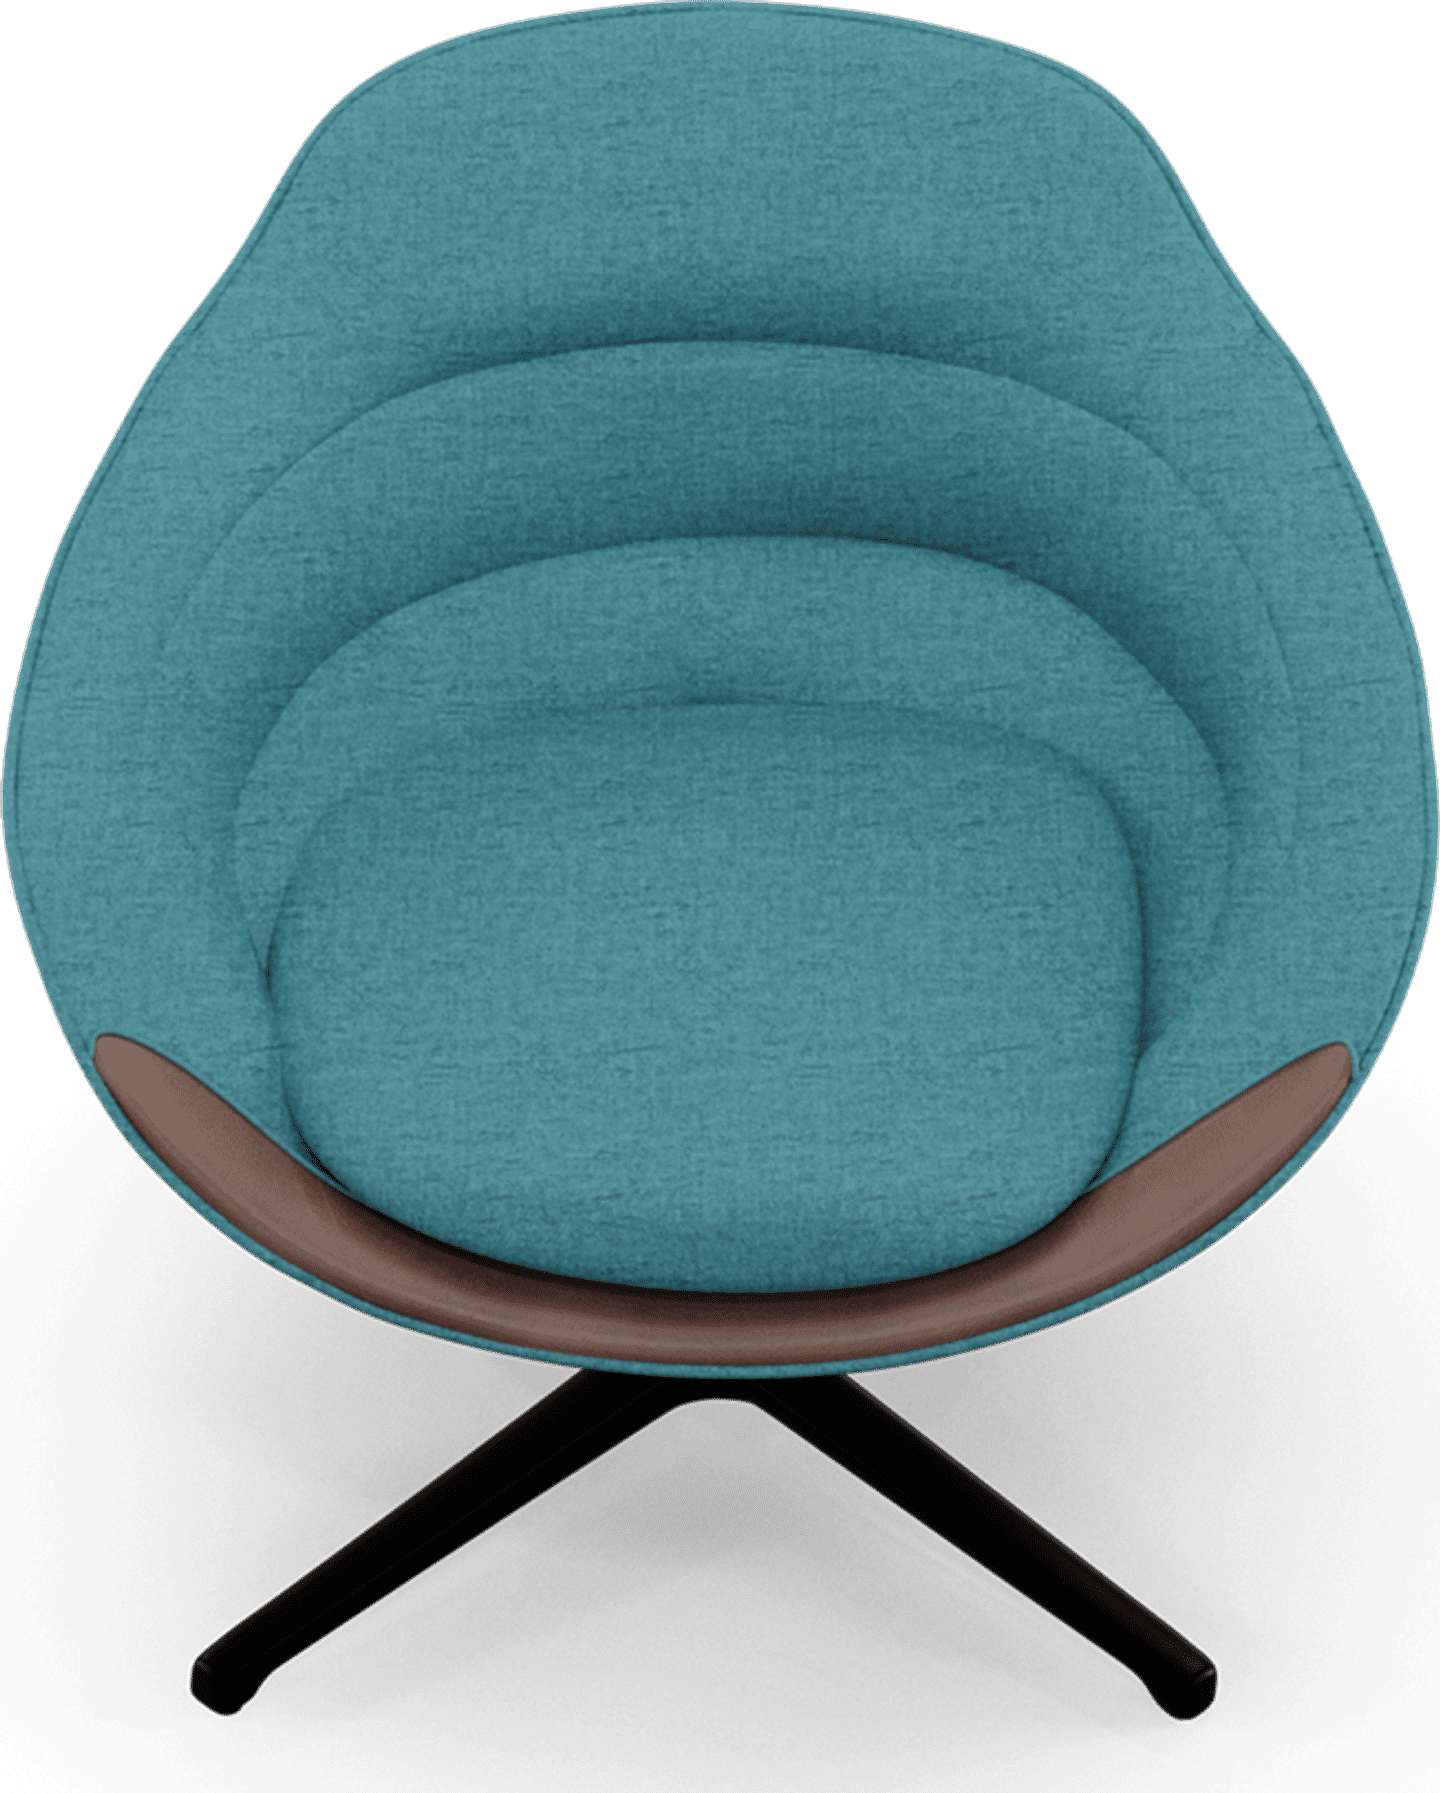 Chaise longue Bugsy Blue image.